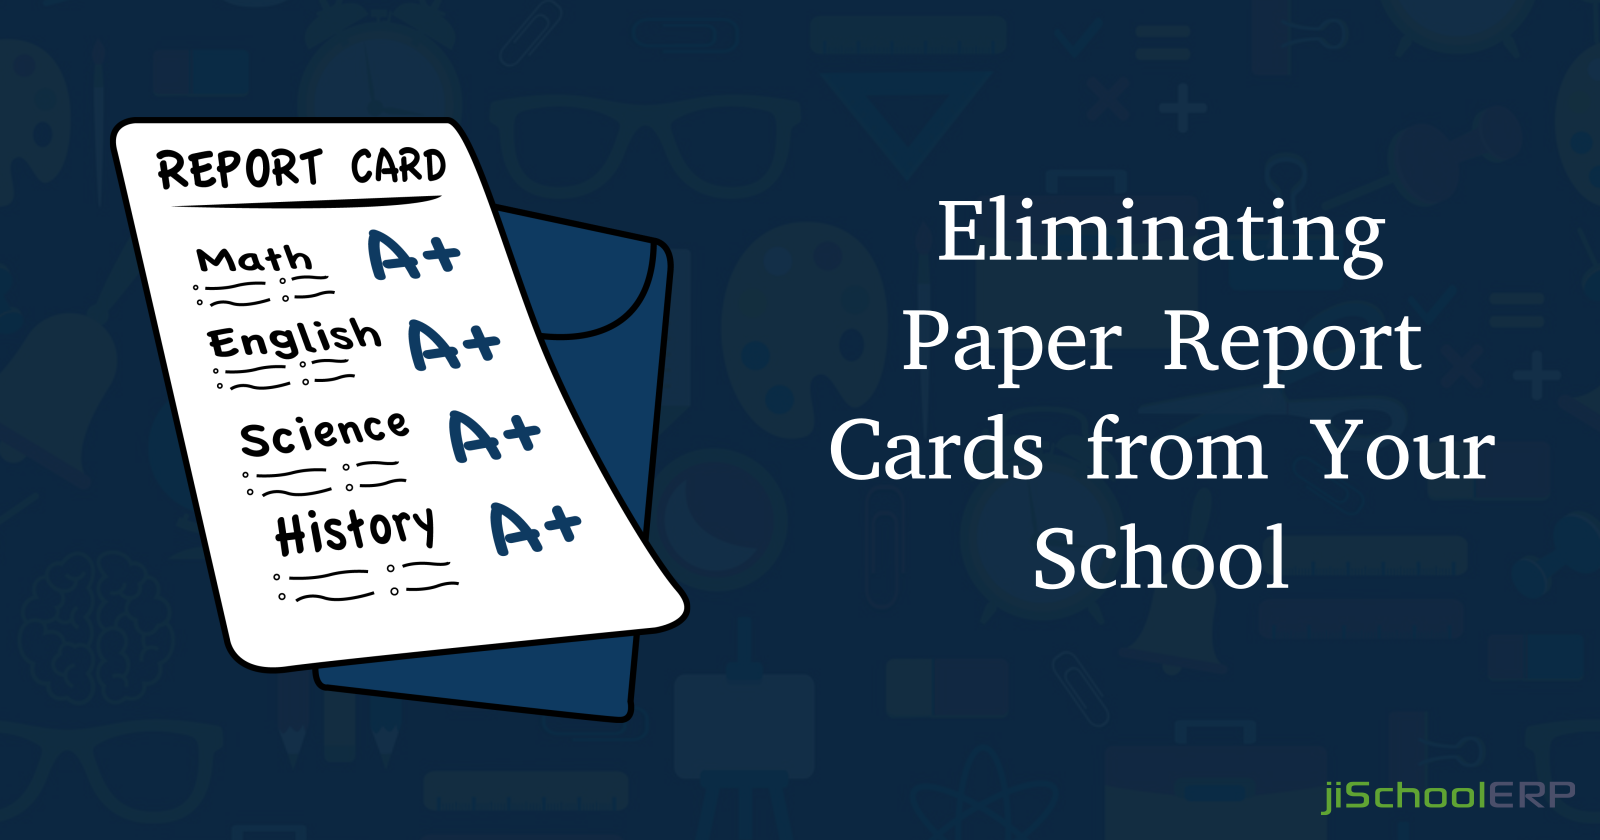 Eliminating Paper Report Cards from Your School